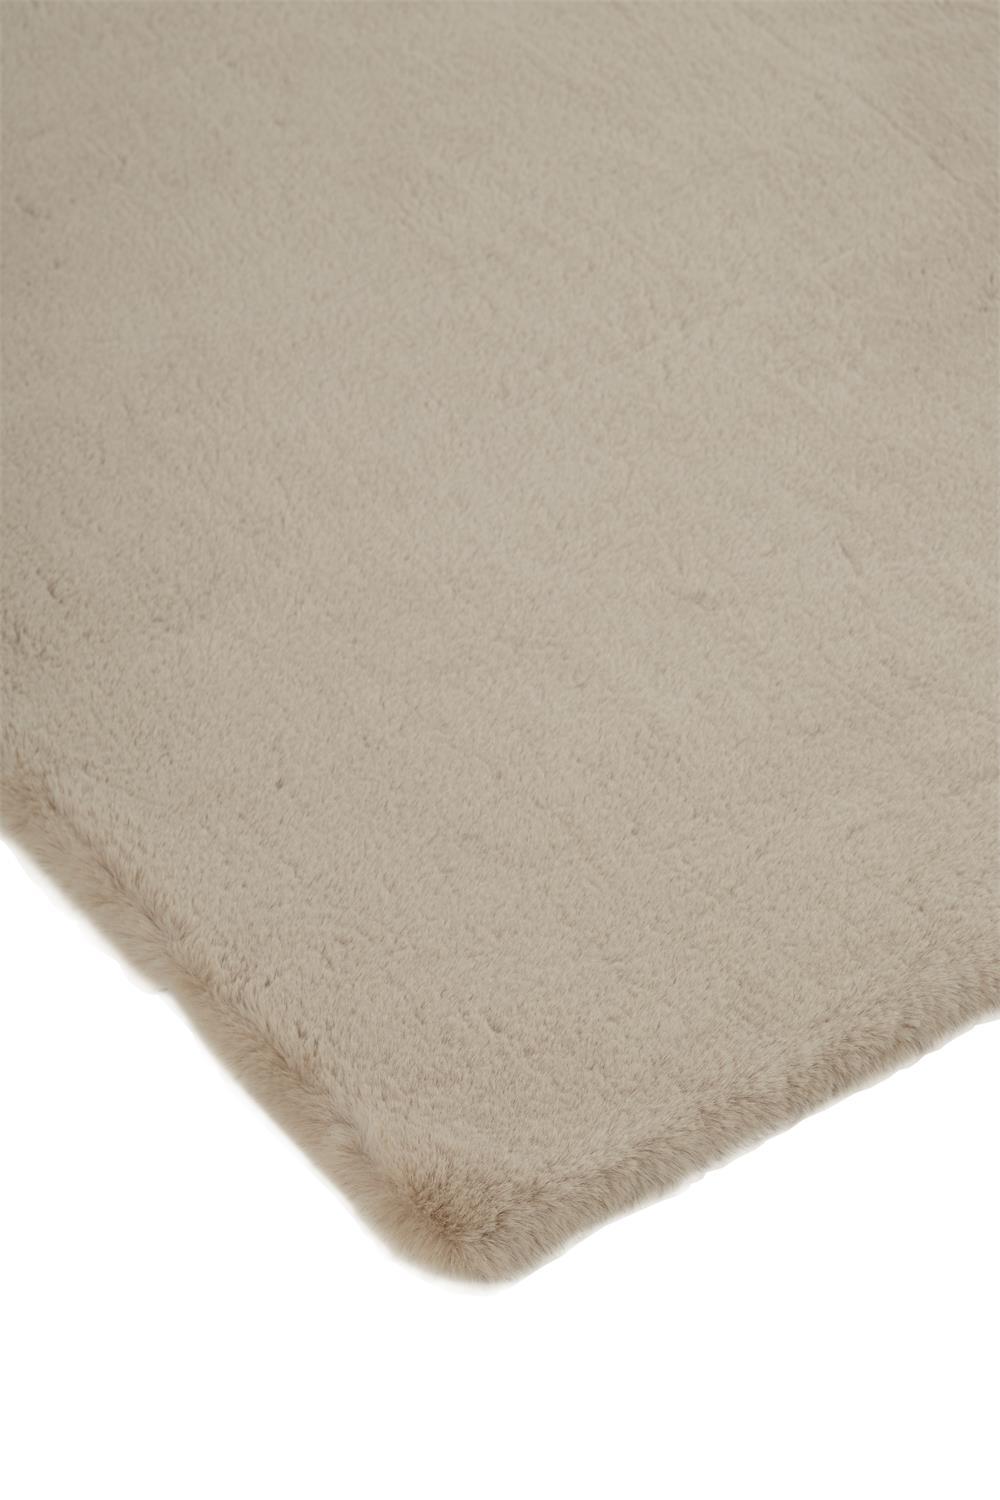 Feizy Feizy Luxe Velour Glamorous Ultra-Soft Shag Rug - Wheat Beige - Available in 6 Sizes